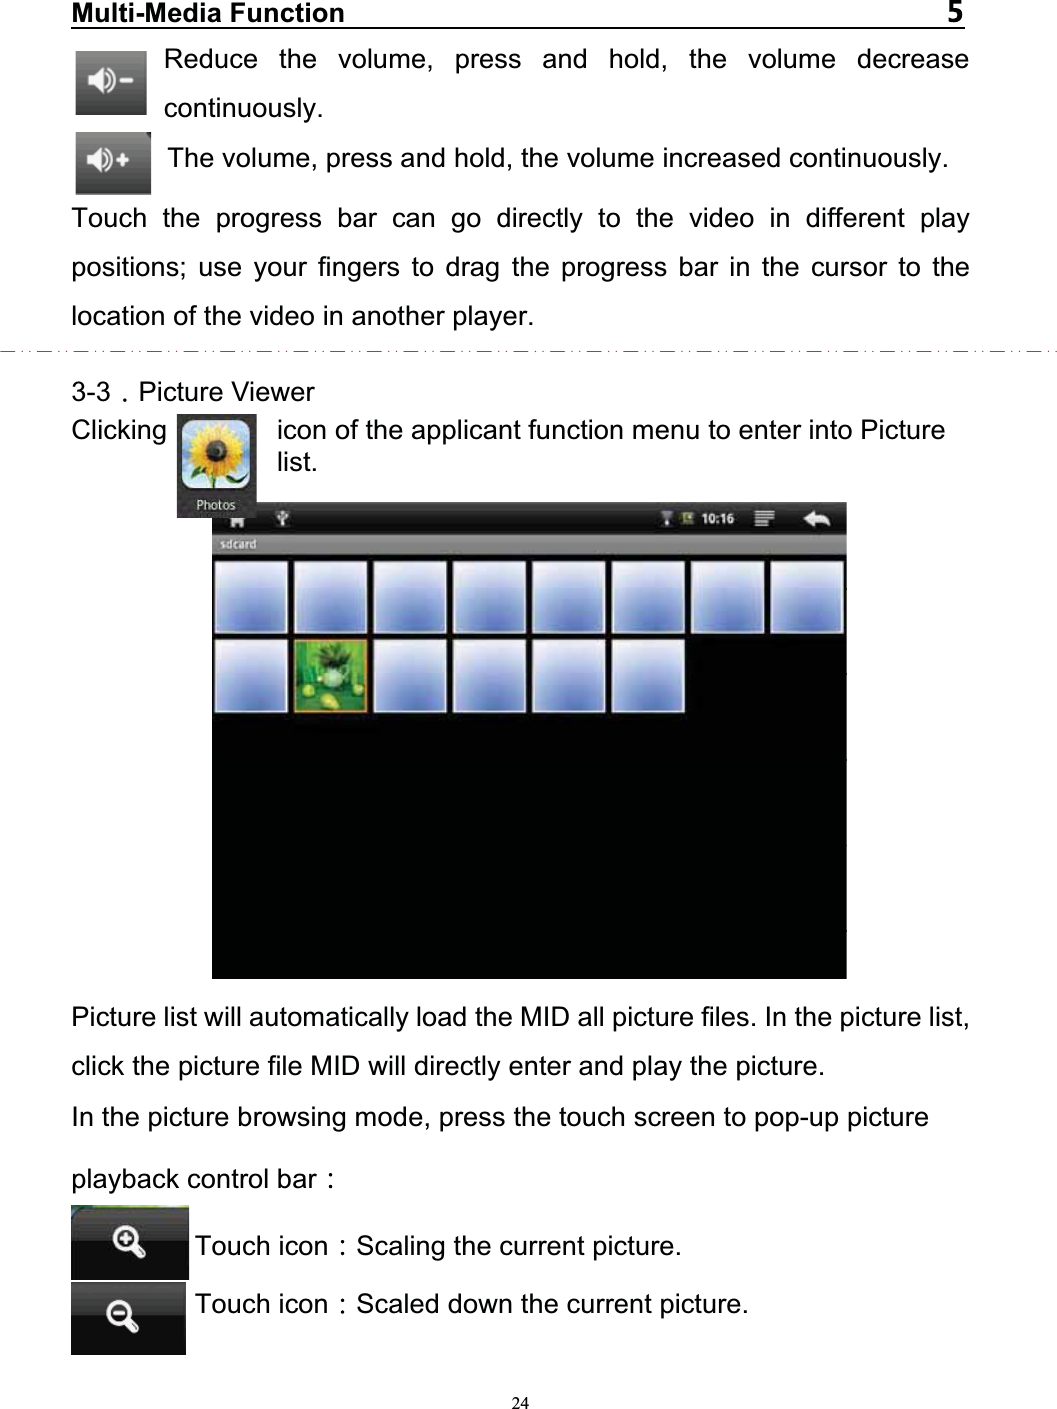   24Multi-Media Function   Reduce the volume, press and hold, the volume decrease continuously. The volume, press and hold, the volume increased continuously. Touch the progress bar can go directly to the video in different play positions; use your fingers to drag the progress bar in the cursor to the location of the video in another player.  3-3 Picture Viewer Clicking        icon of the applicant function menu to enter into Picture list.               Picture list will automatically load the MID all picture files. In the picture list, click the picture file MID will directly enter and play the picture. In the picture browsing mode, press the touch screen to pop-up picture playback control bar  Touch icon Scaling the current picture. Touch icon Scaled down the current picture.  